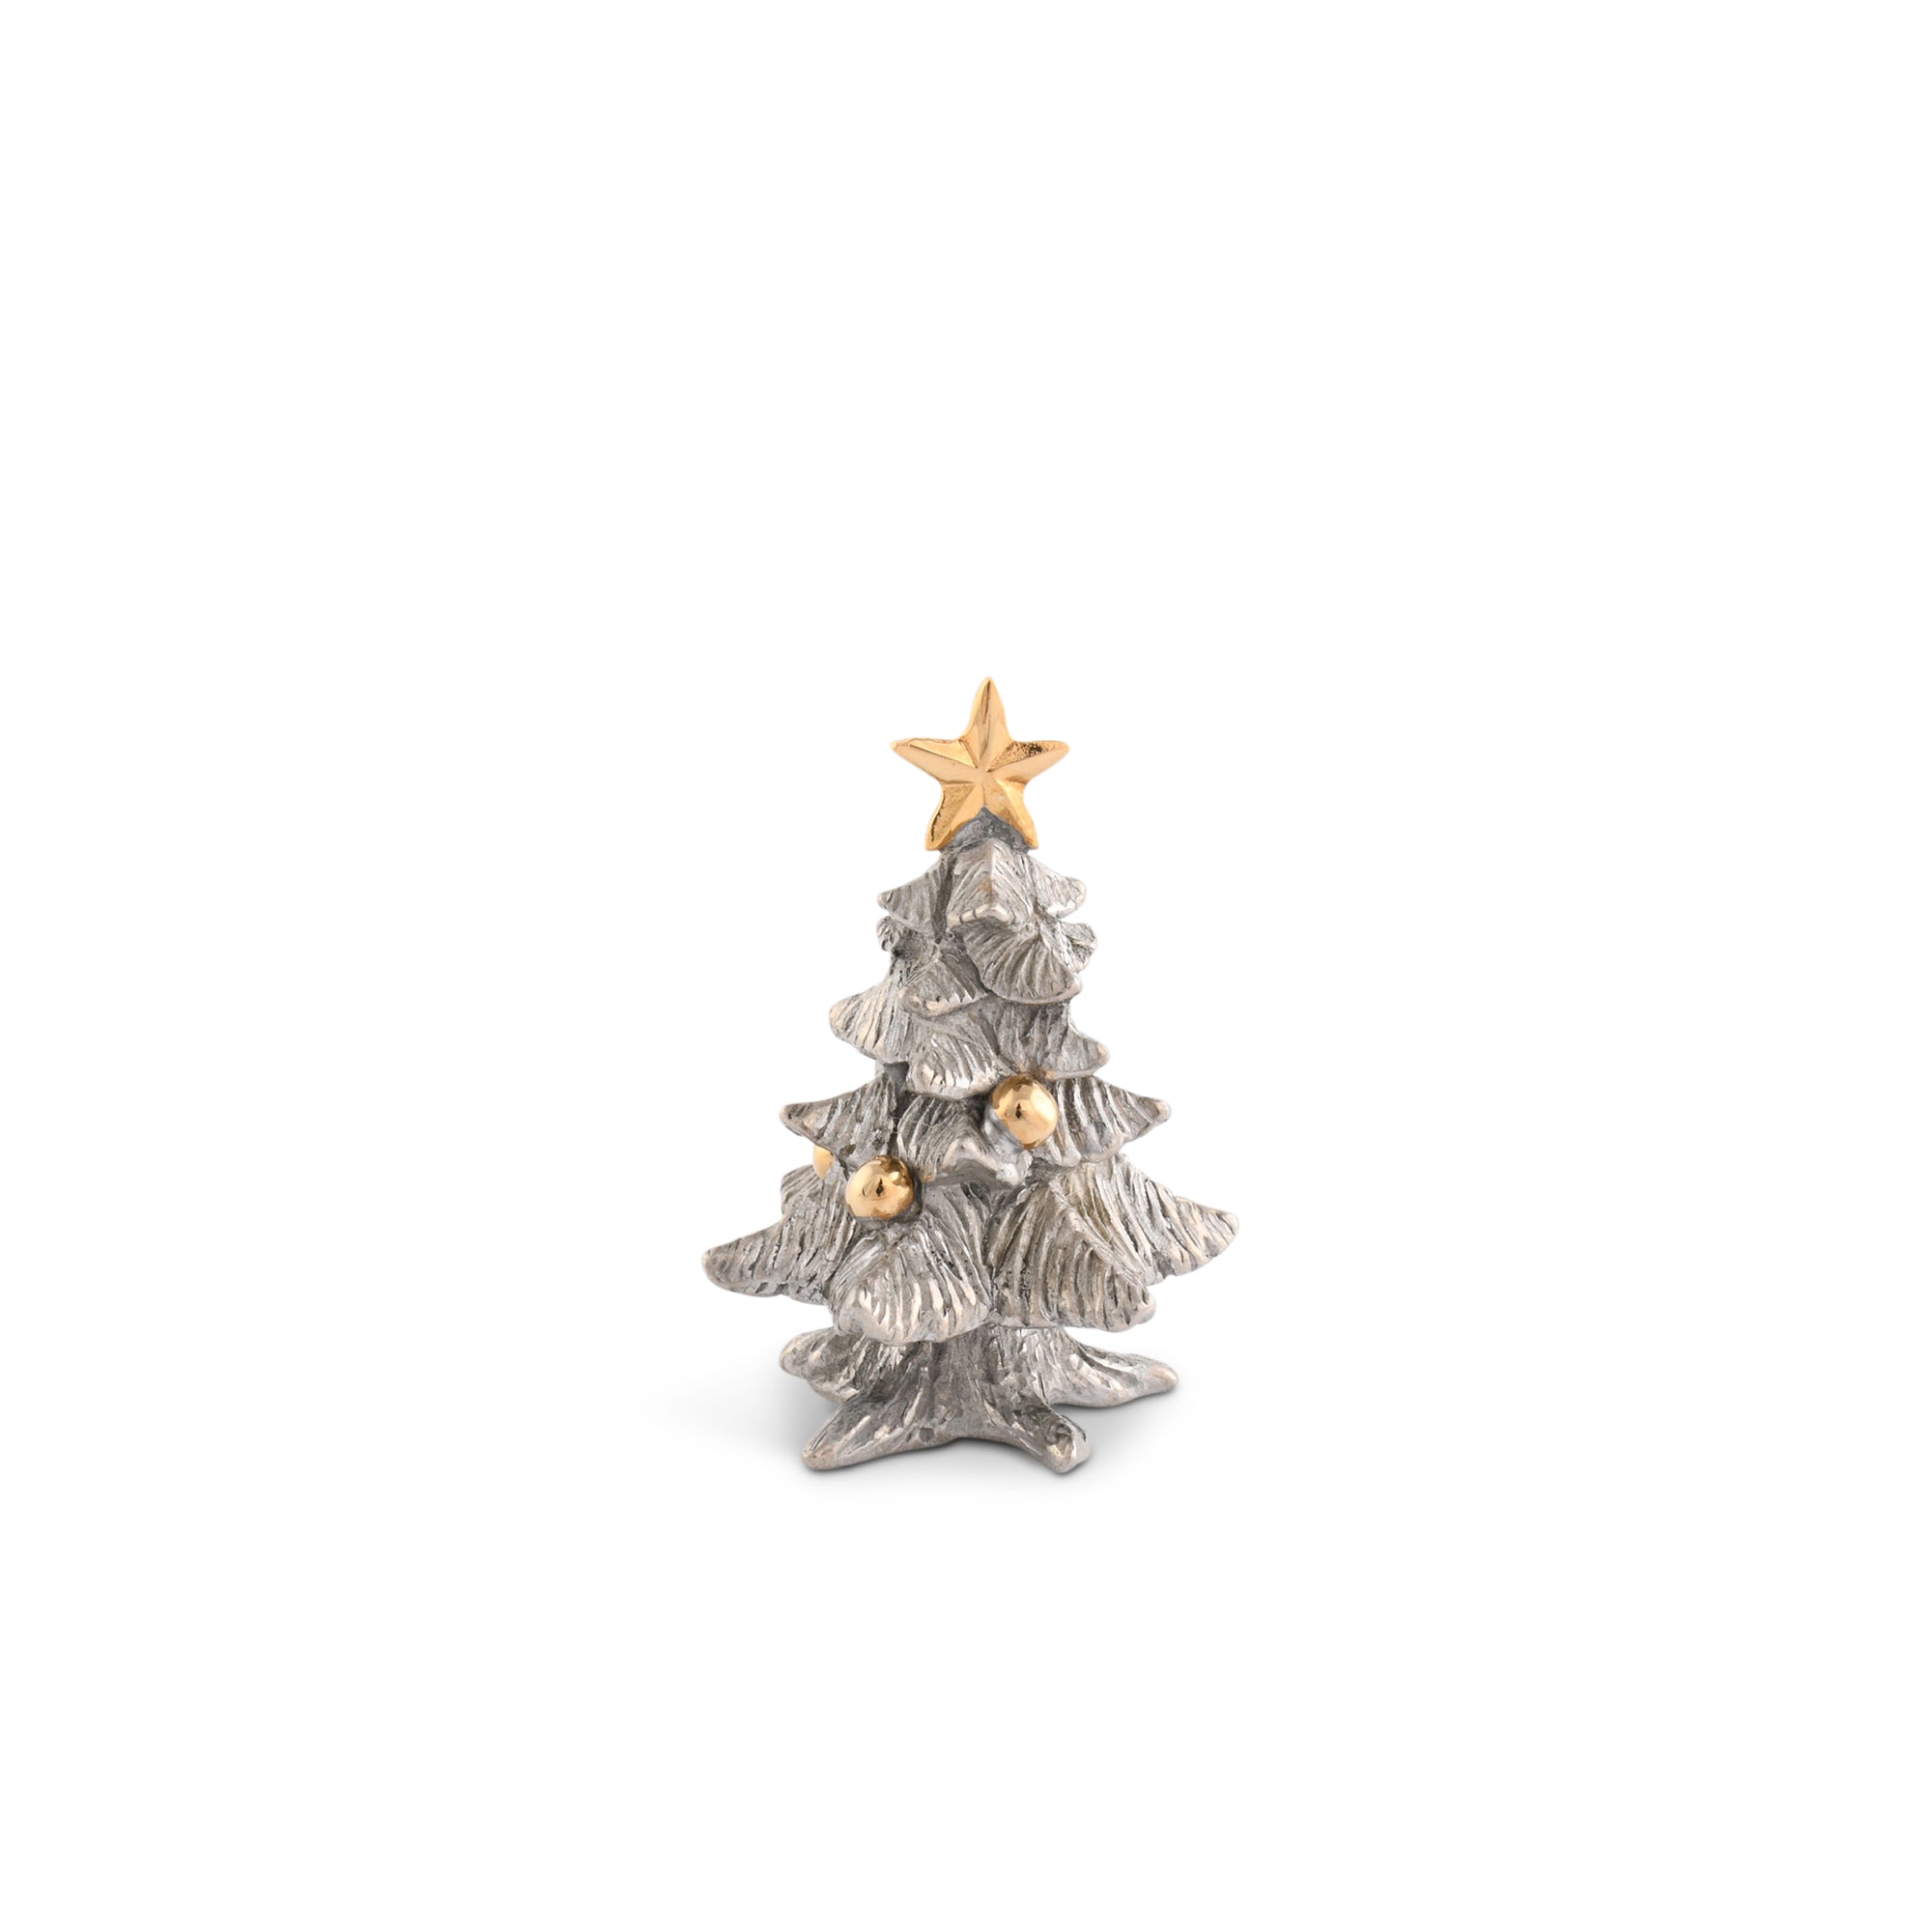 Vagabond House Chirstmas Tree Placecard Holder Product Image